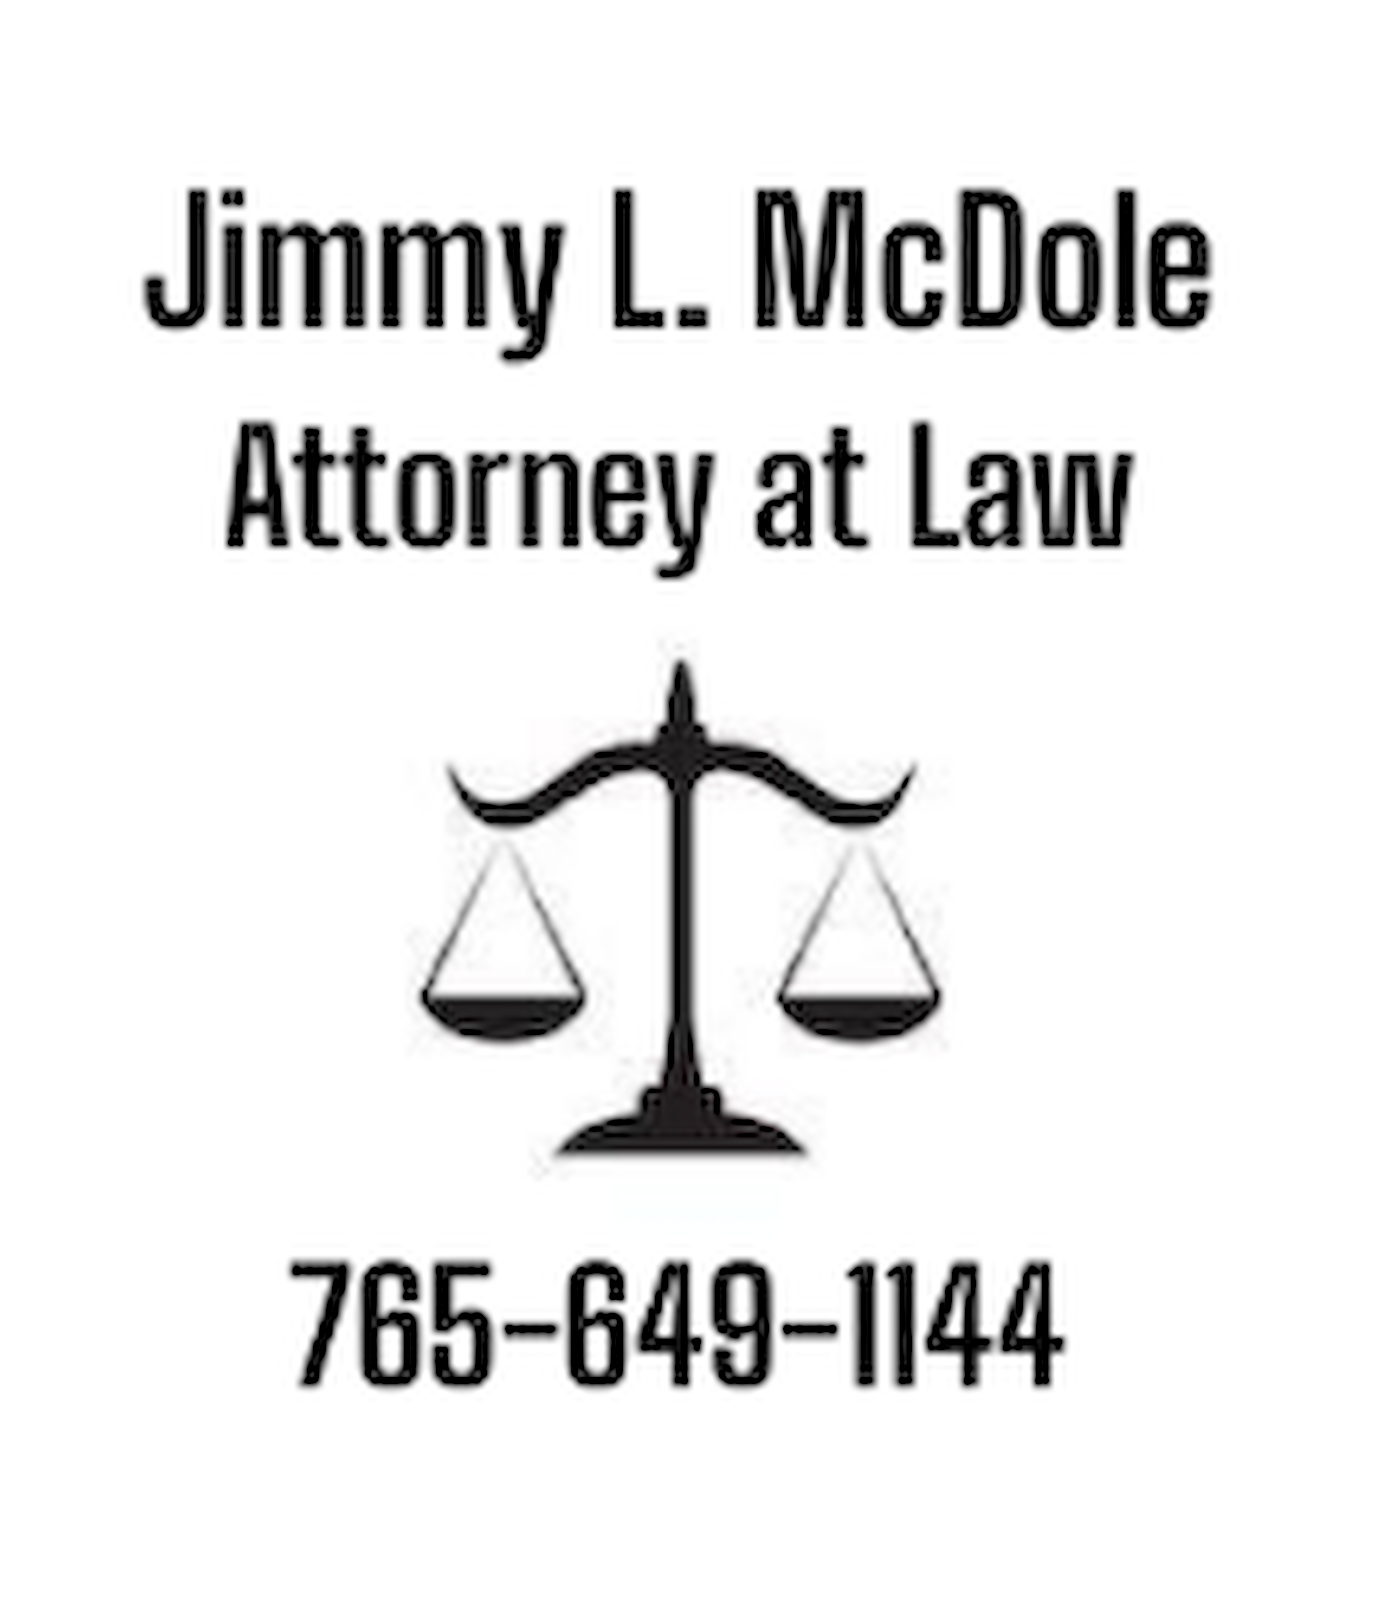 Jimmy L. McDole, Attorney at Law